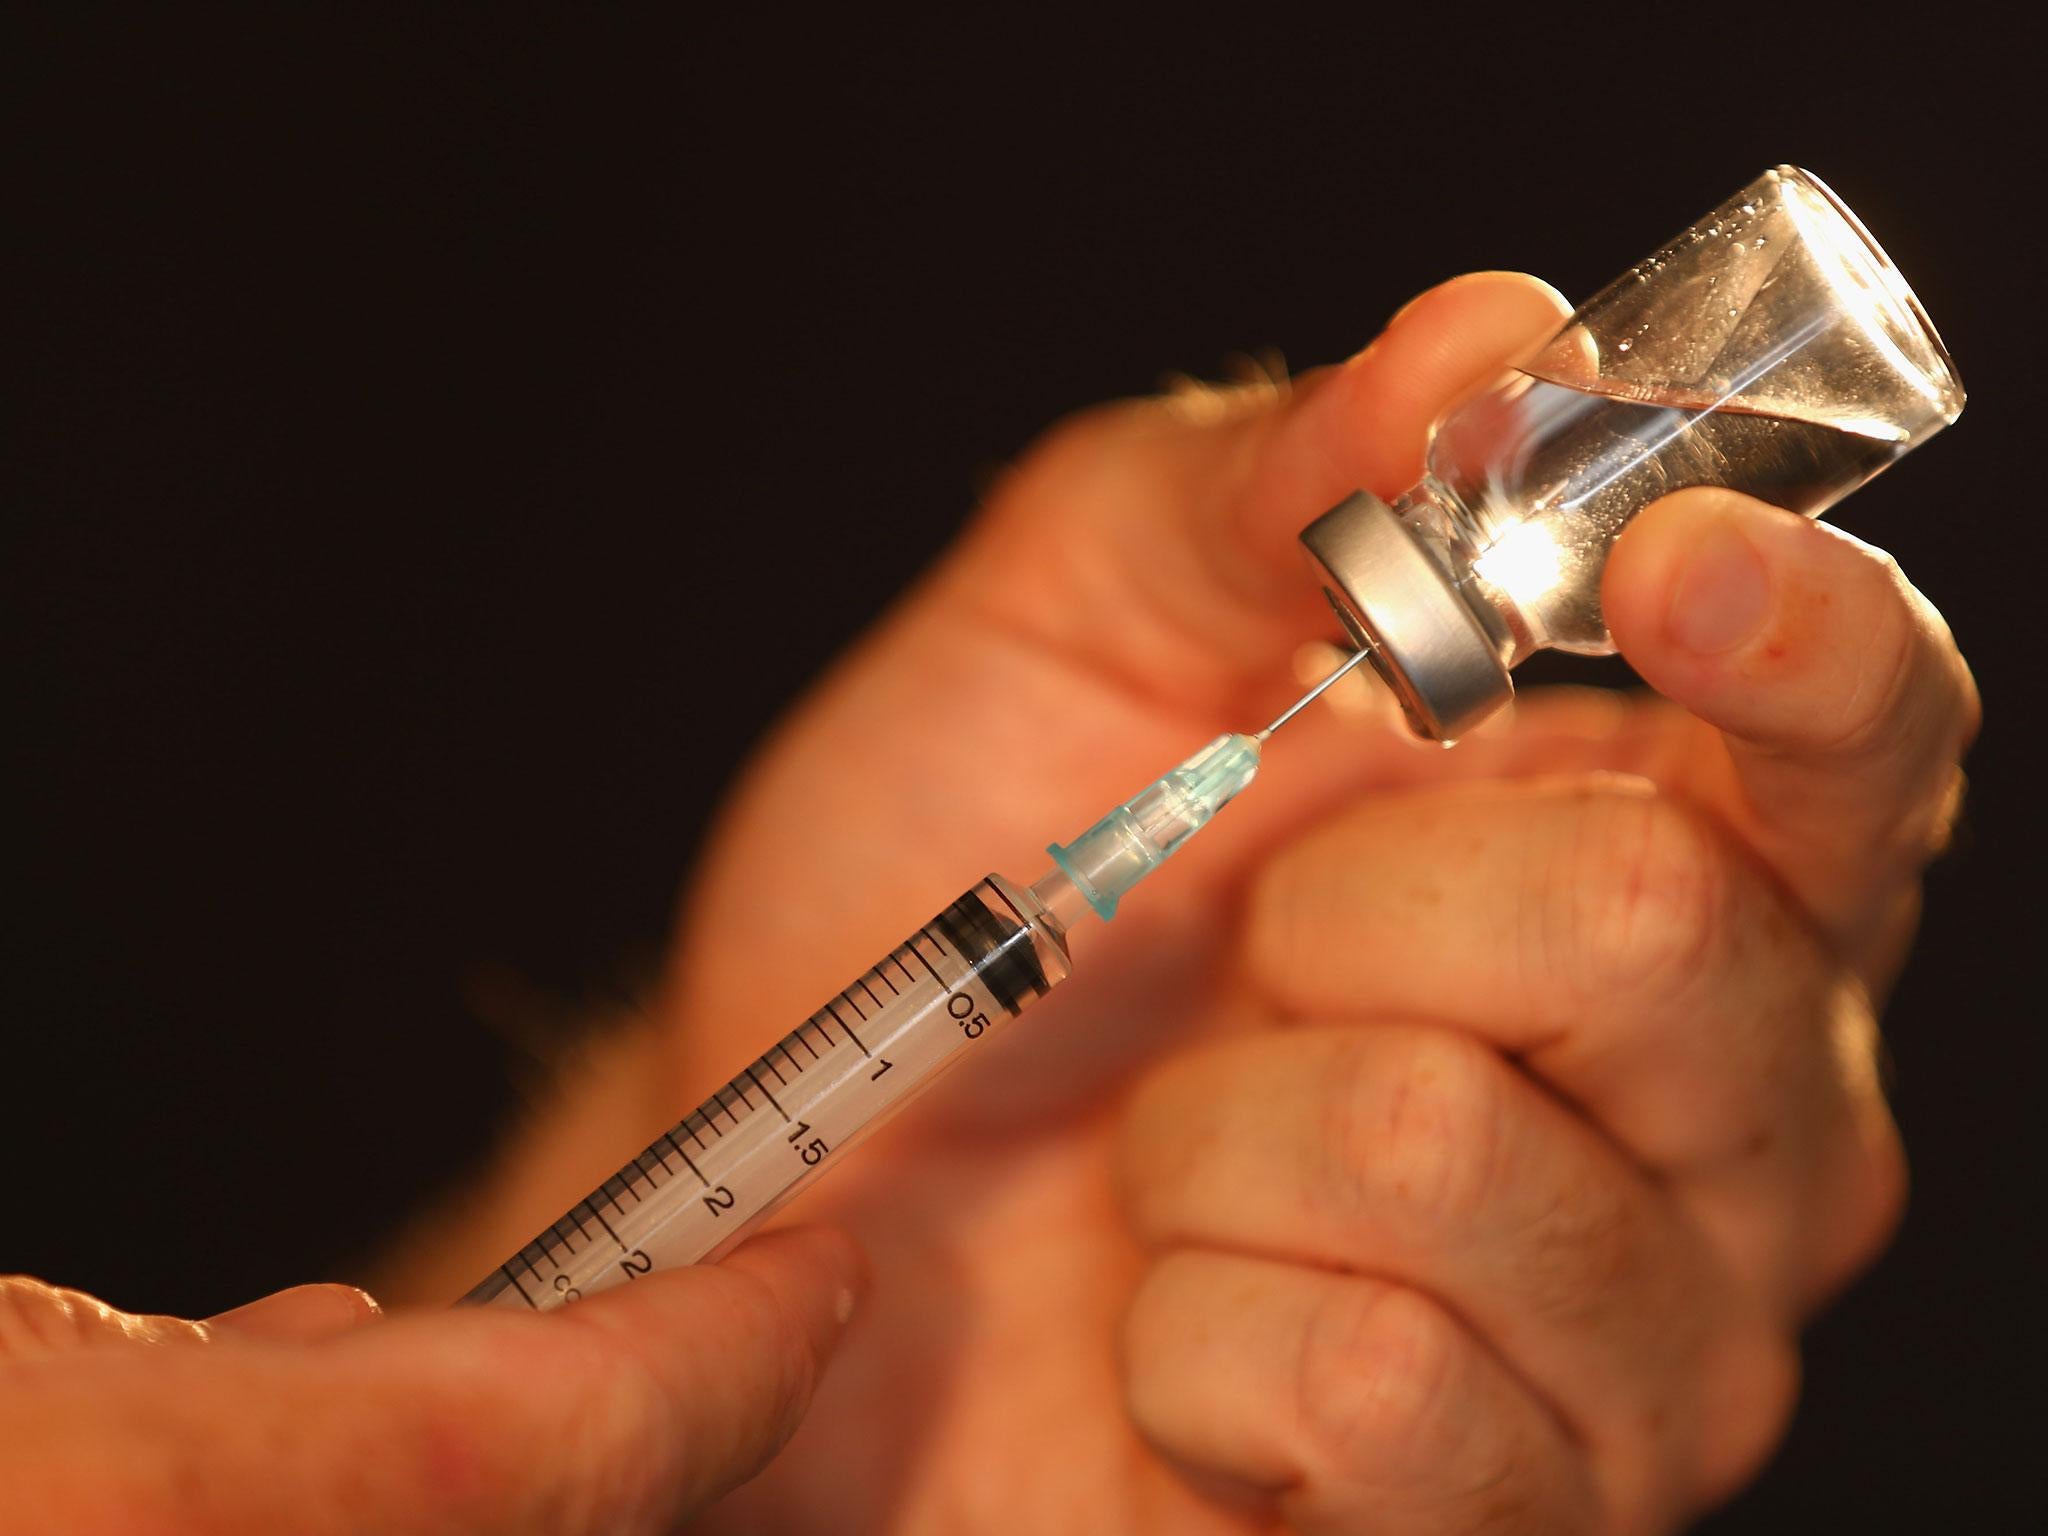 Three in four men said they would be willing to continue using injection